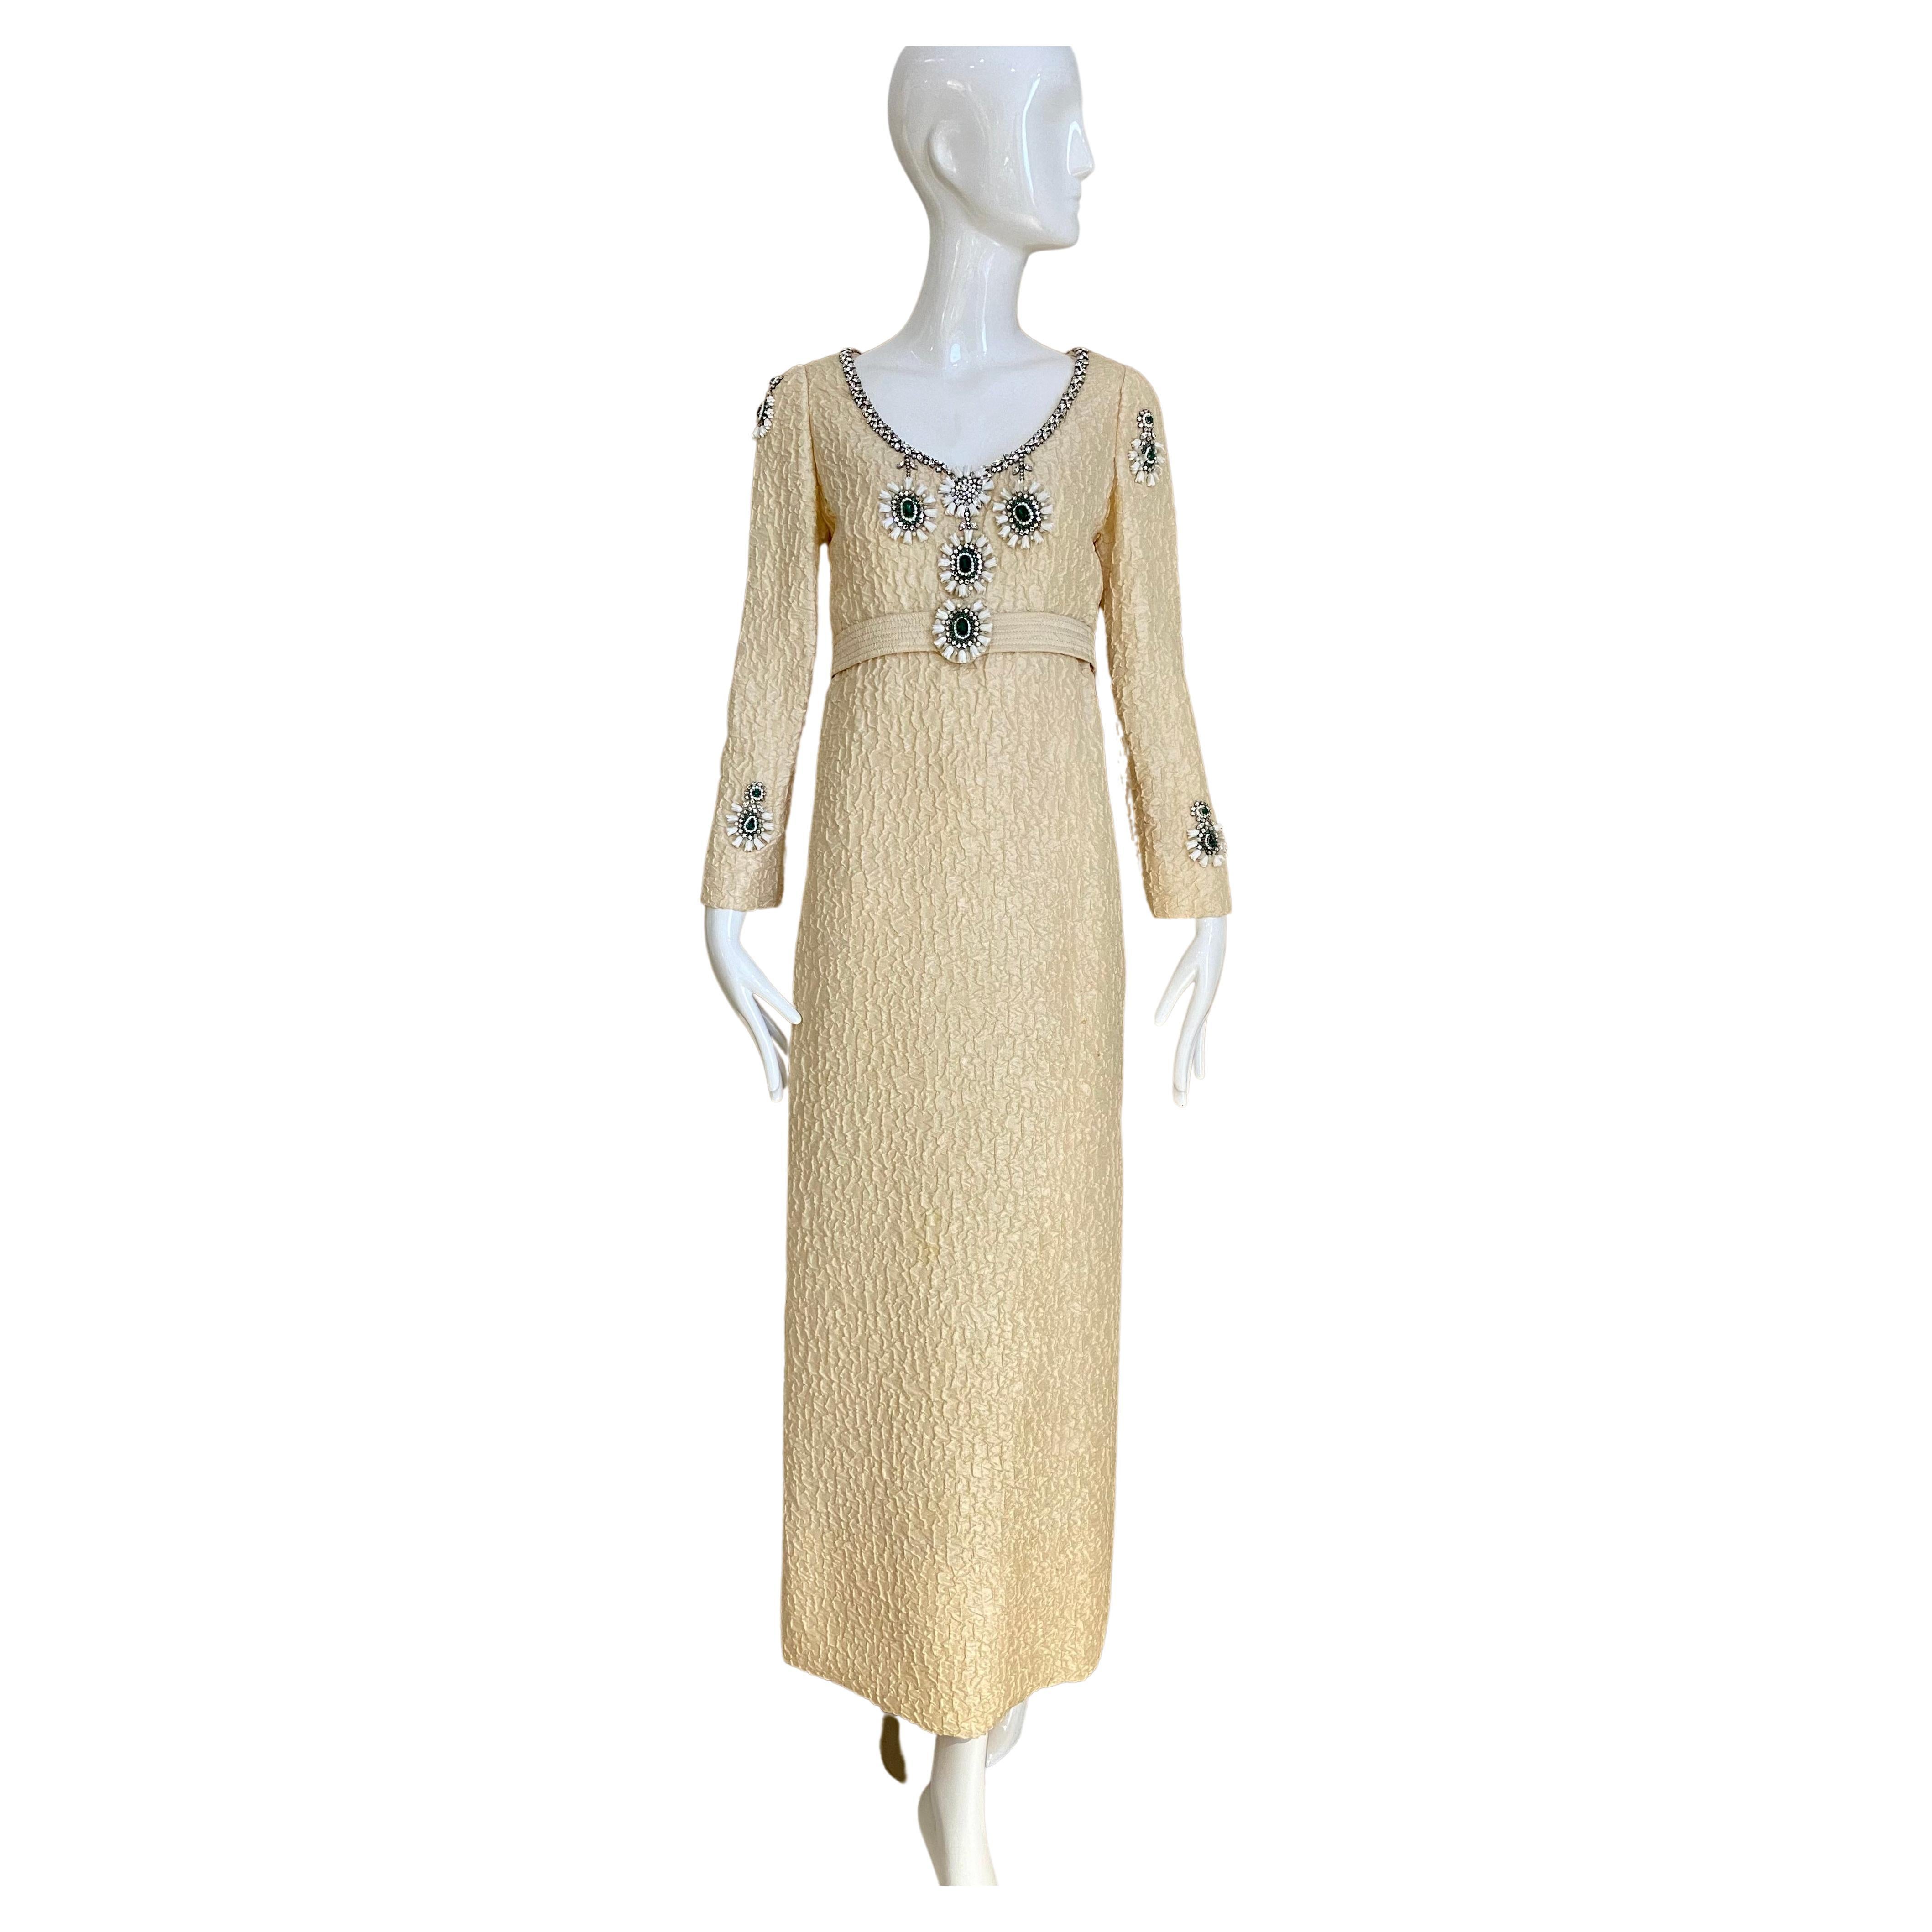 1960s Galanos Creme Long Sleeve Dress with Green Rhinestones Embellishment  For Sale